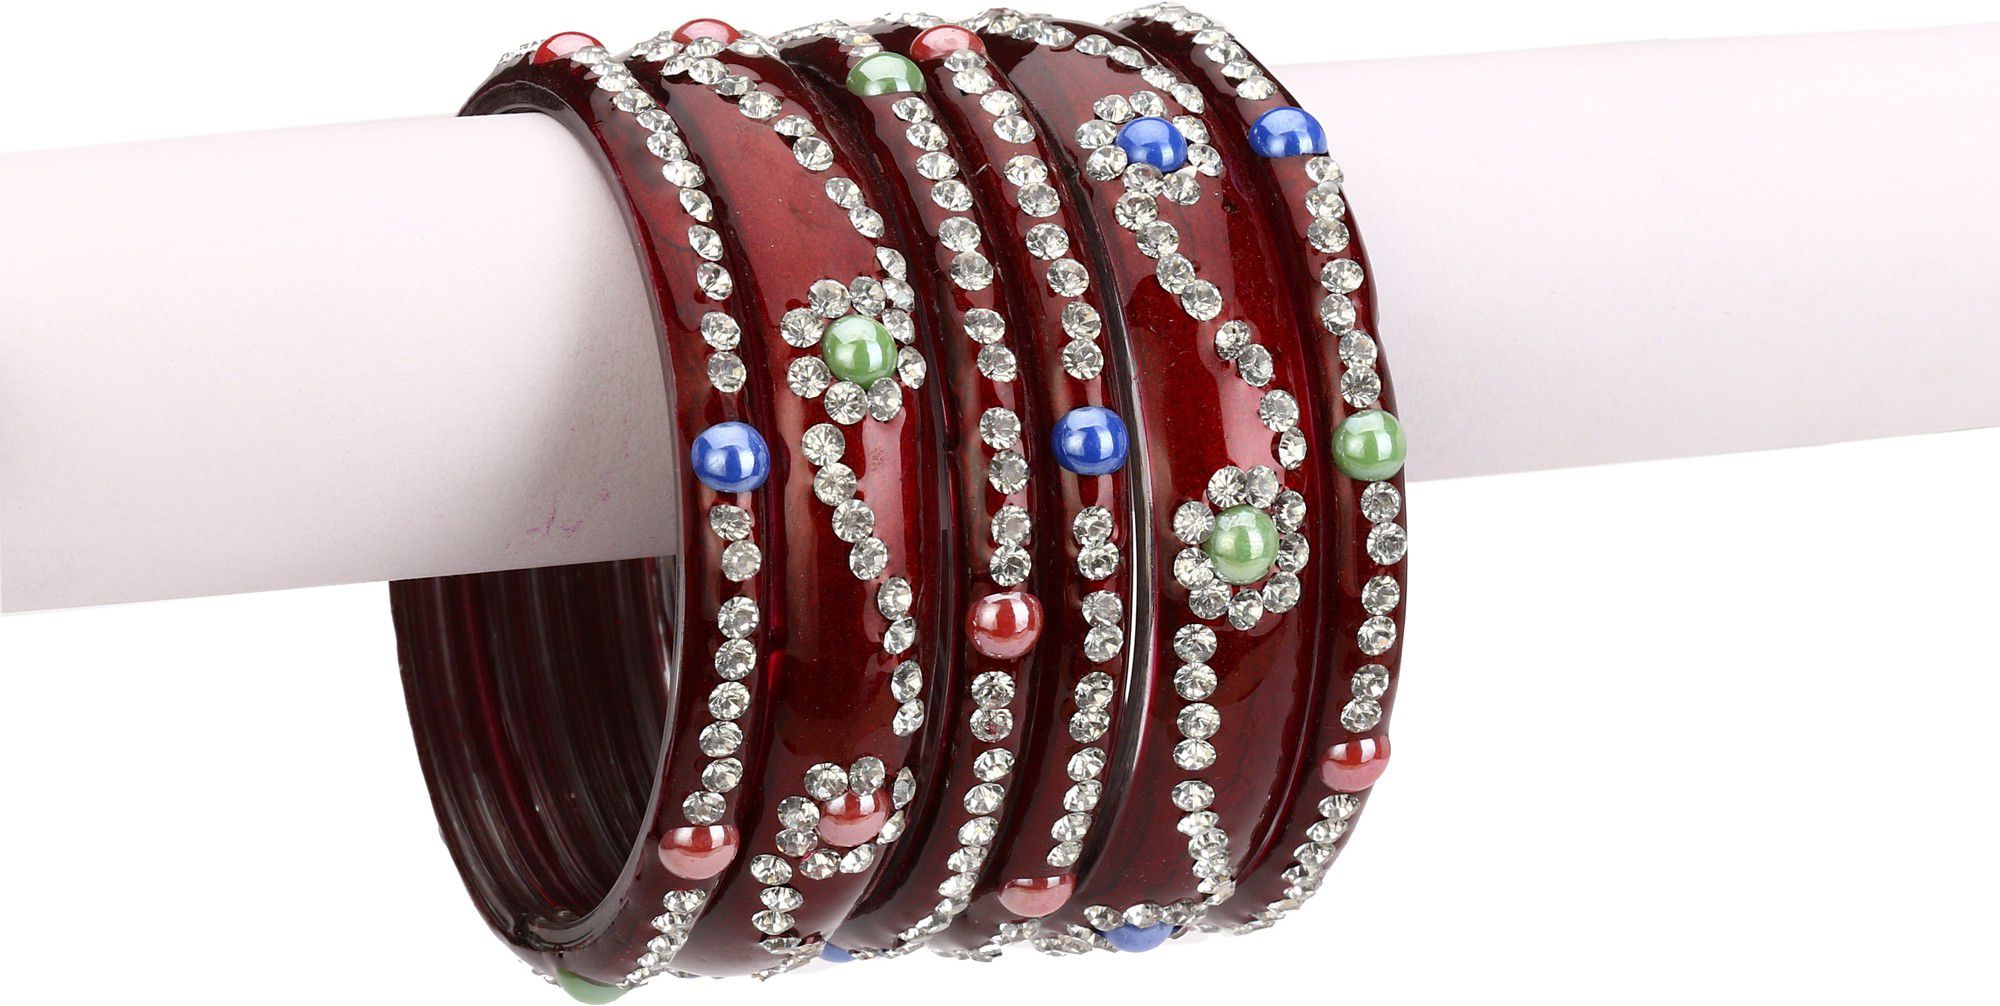     			Somil Maroon Color 2 & 4 Bangle Set decorative With Colorful Beads & Stones With Safety Box-DN_2.8